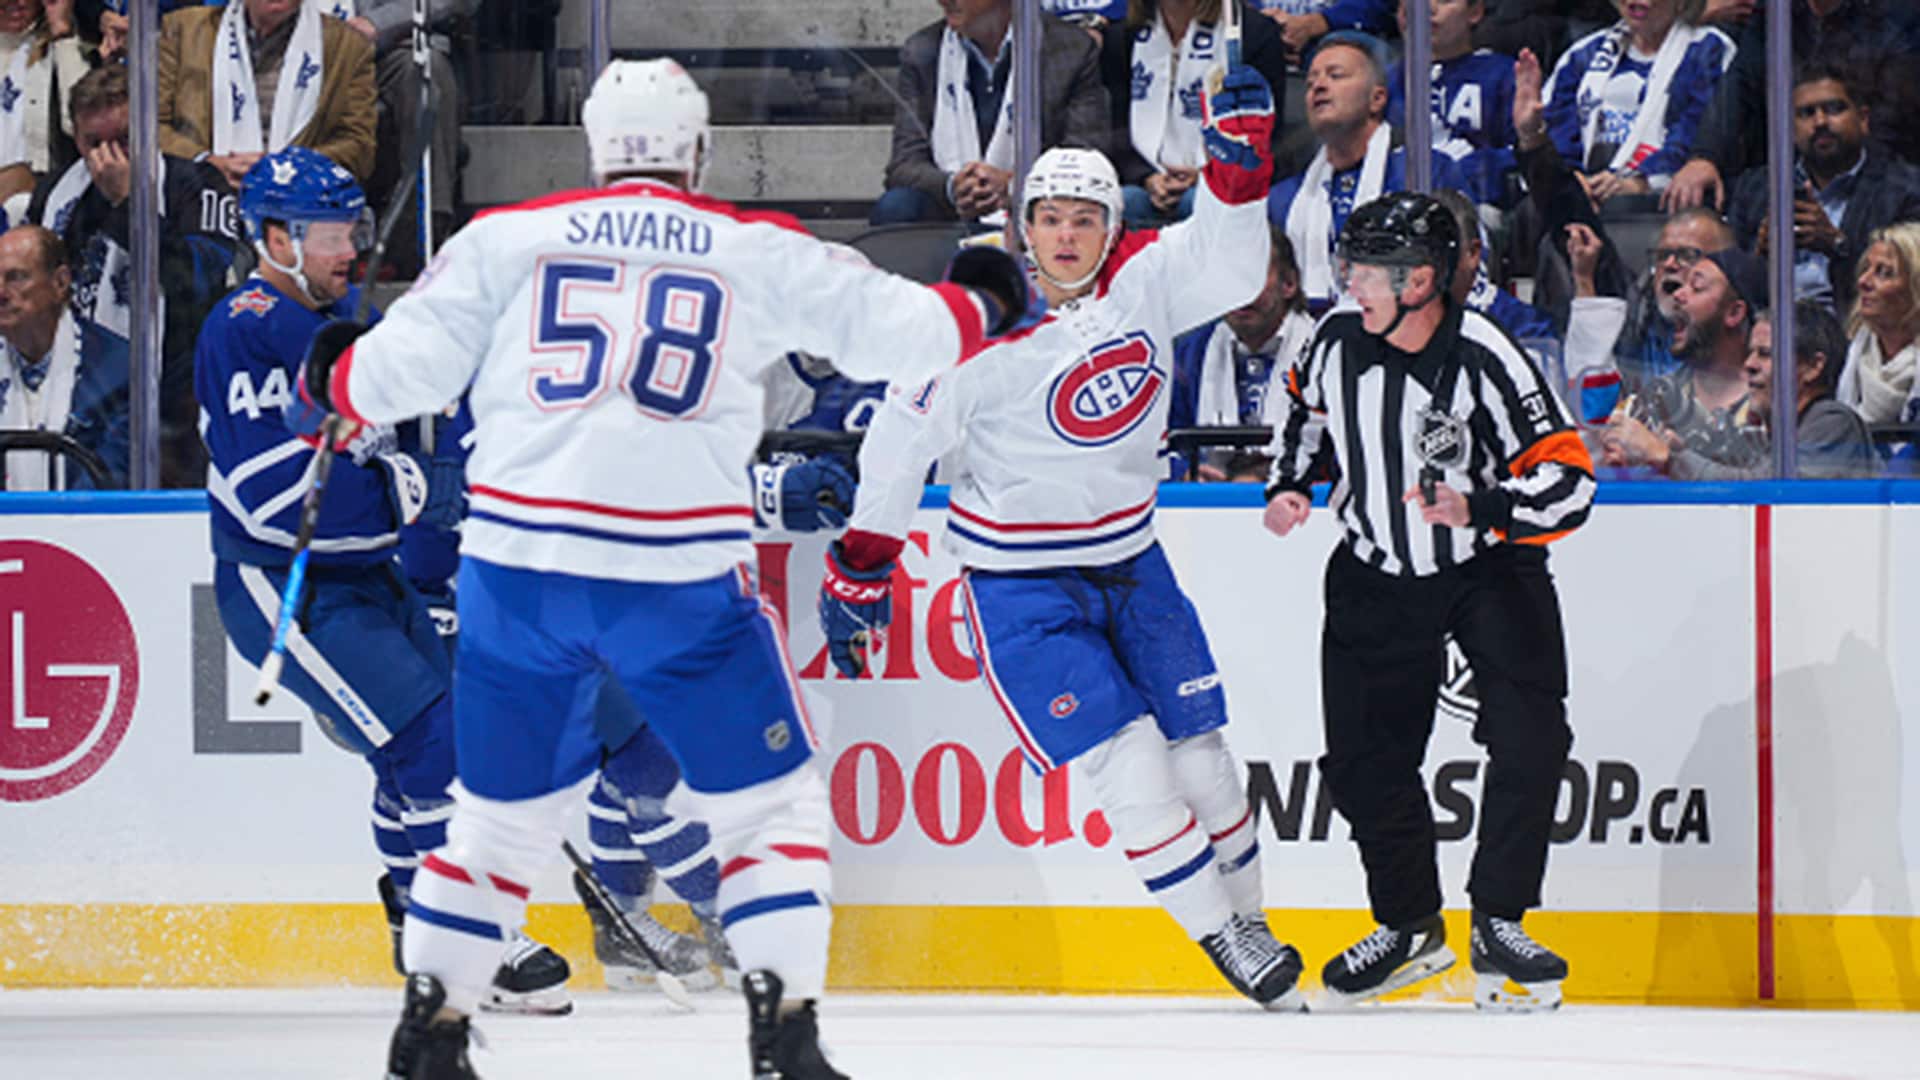 Canadiens shake the retro jersey curse with OT win over Islanders